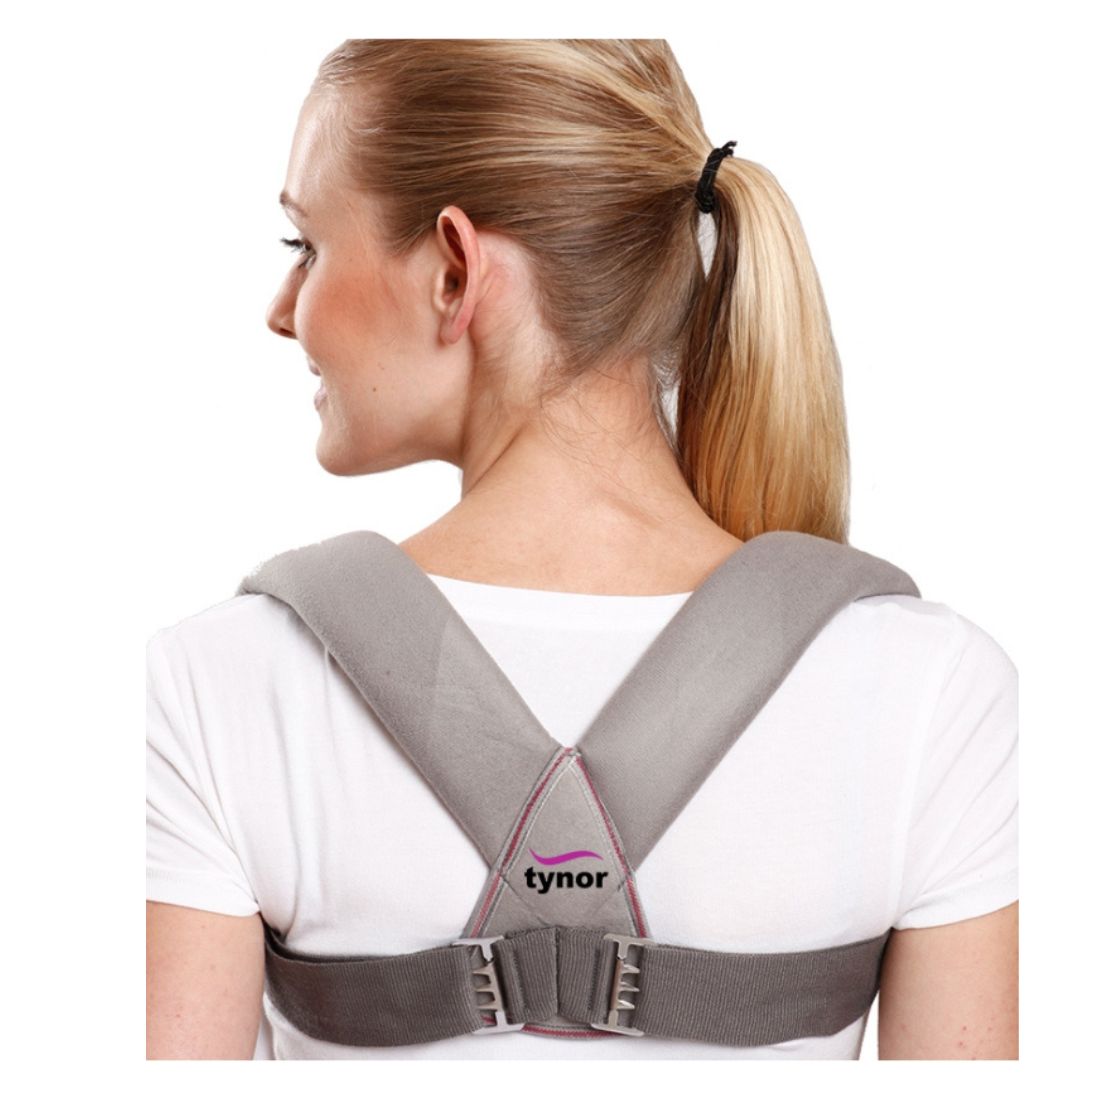 Shop Tynor Clavicle Brace with Buckle which is scientifically designed to immobilize, compress and ensure linear union of fractures involving the clavicle bone. 